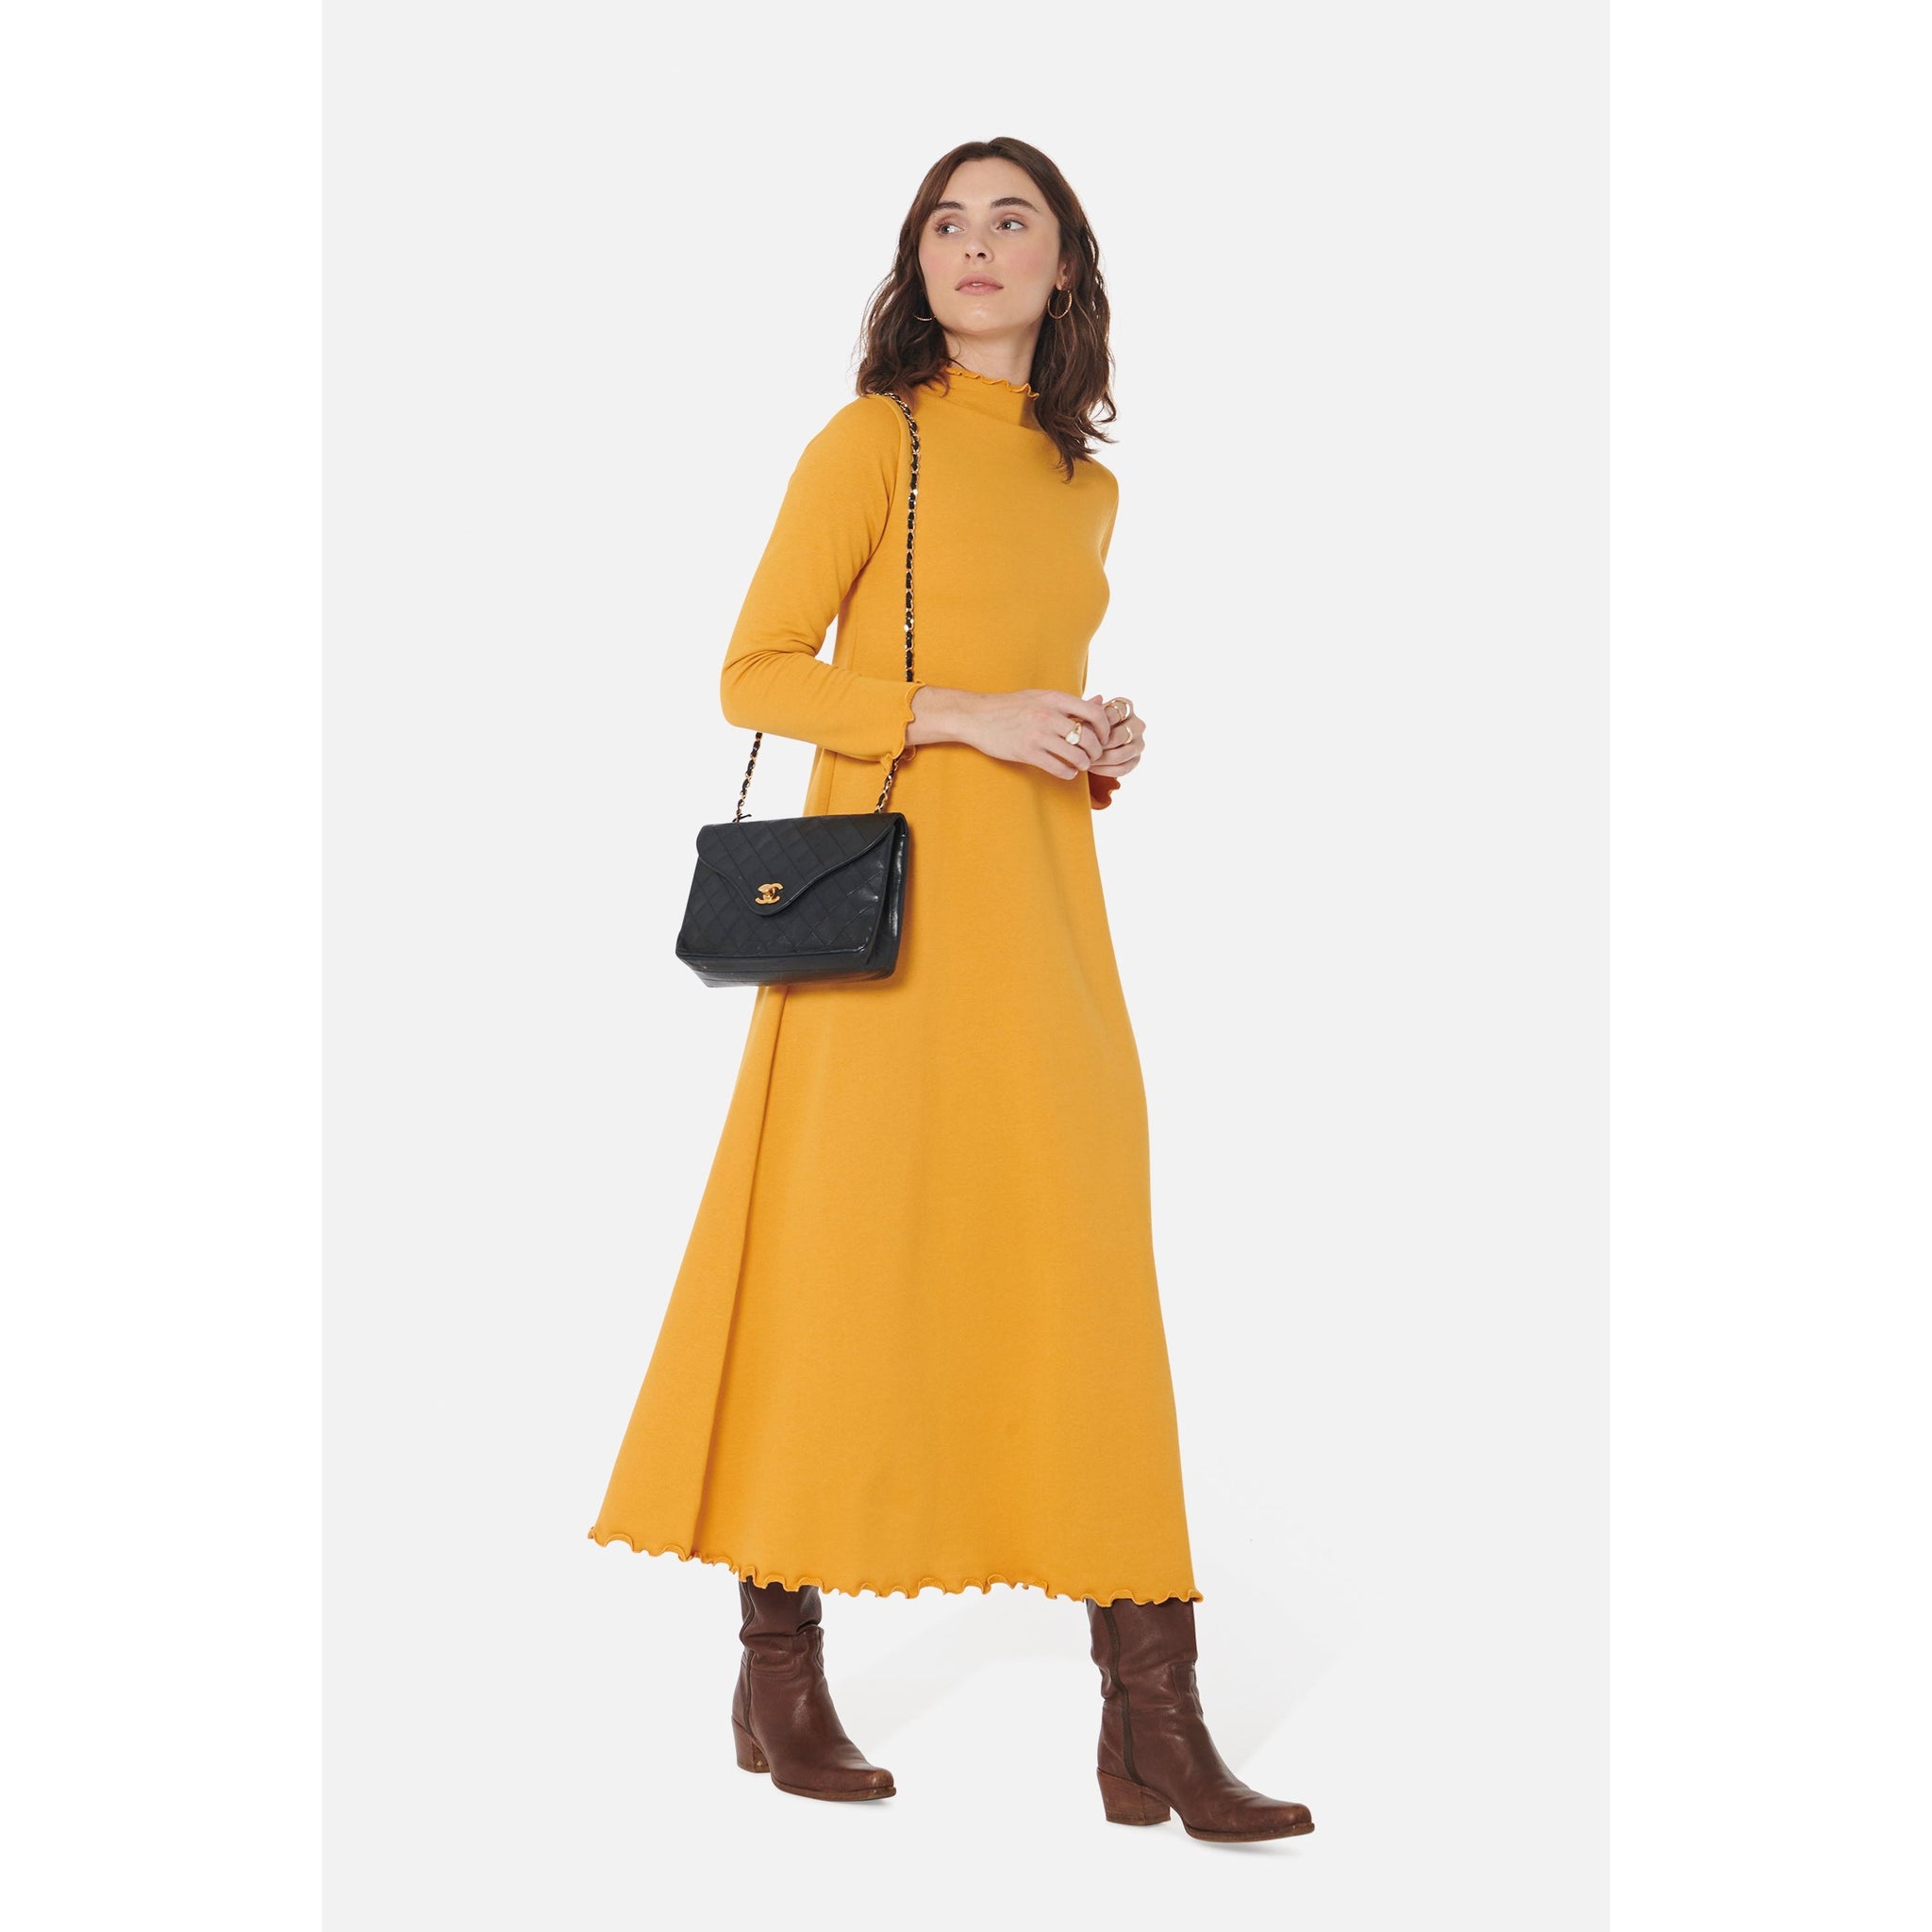 Women's Lounge Dress in Marigold French Terry